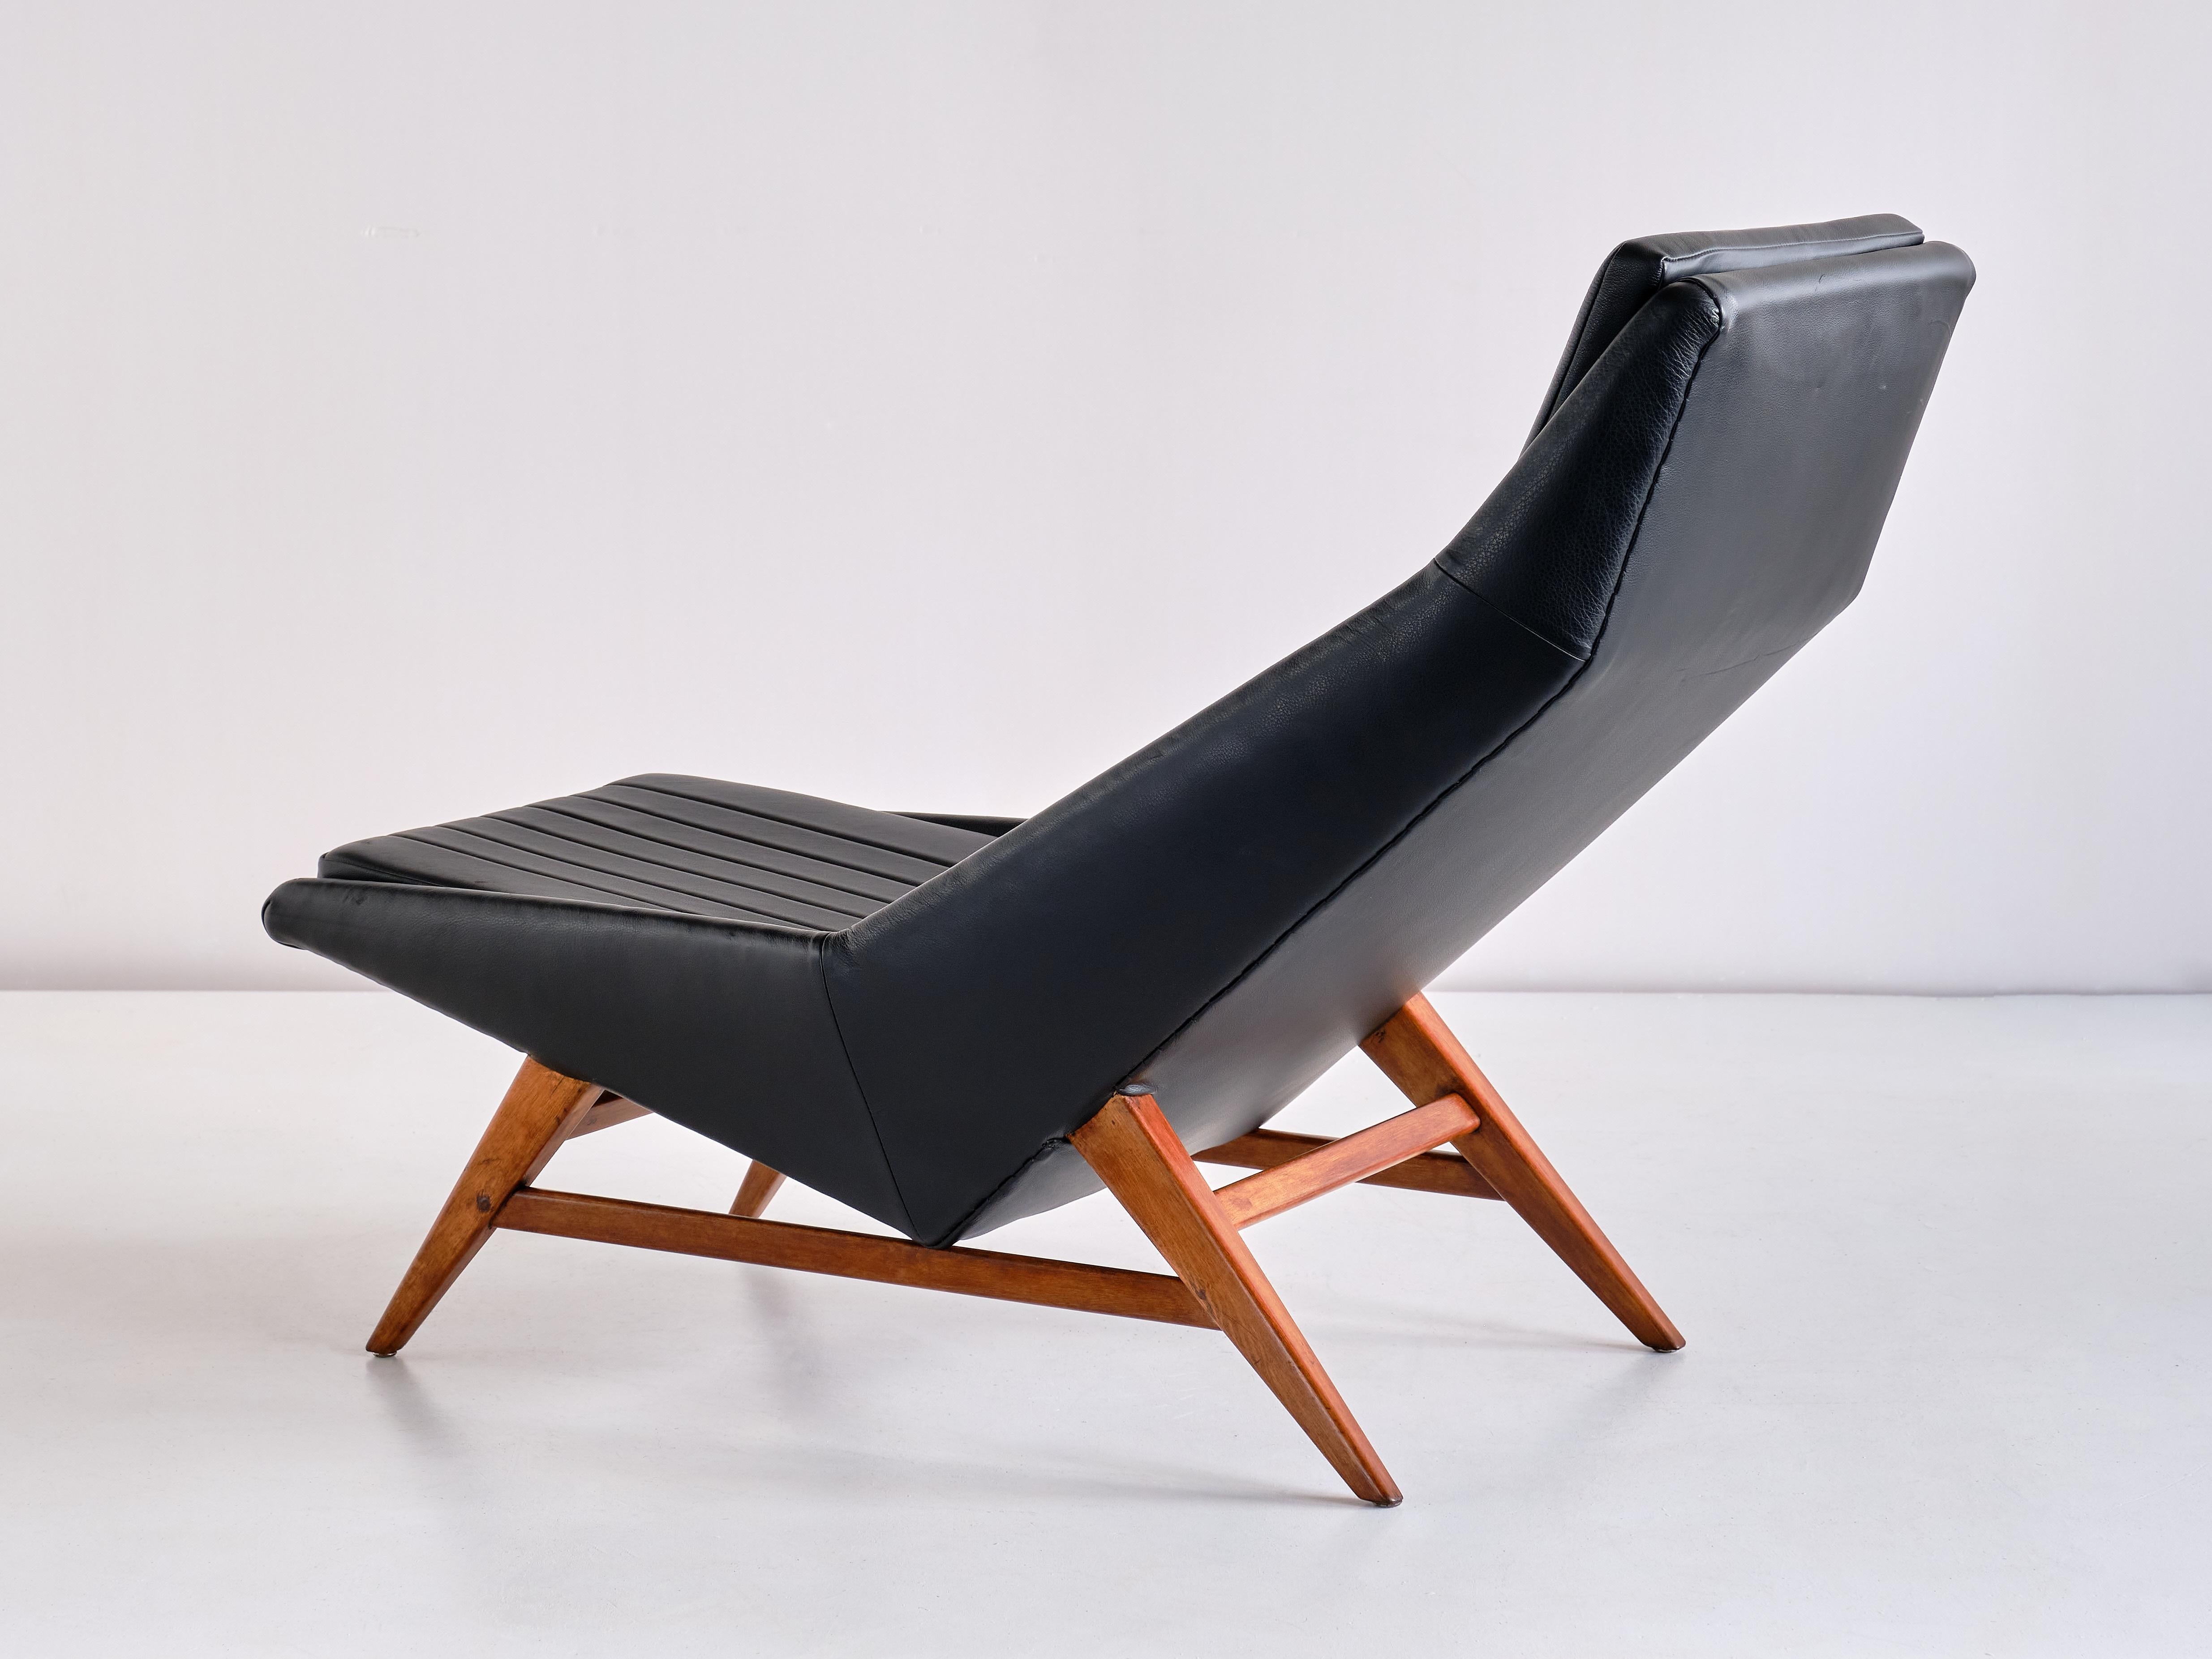 Svante Skogh Lounge Chair in Leather and Beech, AB Hjertquist & Co, Sweden, 1955 In Good Condition For Sale In The Hague, NL